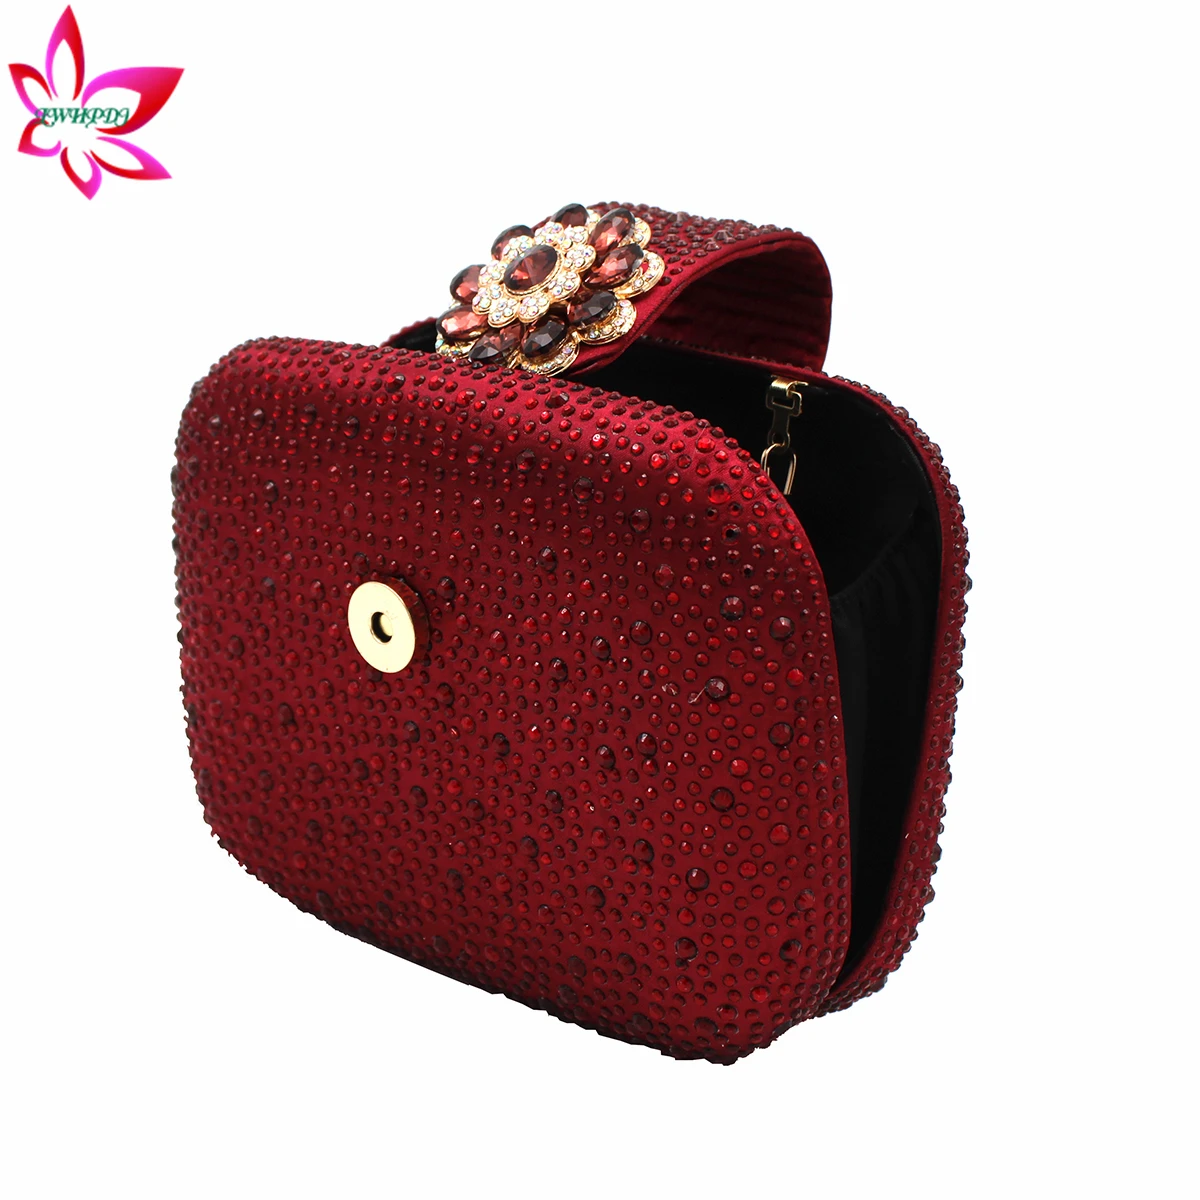 

2023 New Design Chains with Shinning Crysatl Classics Style Women Hand Bag in Wine Color High Quality PU for Wedding